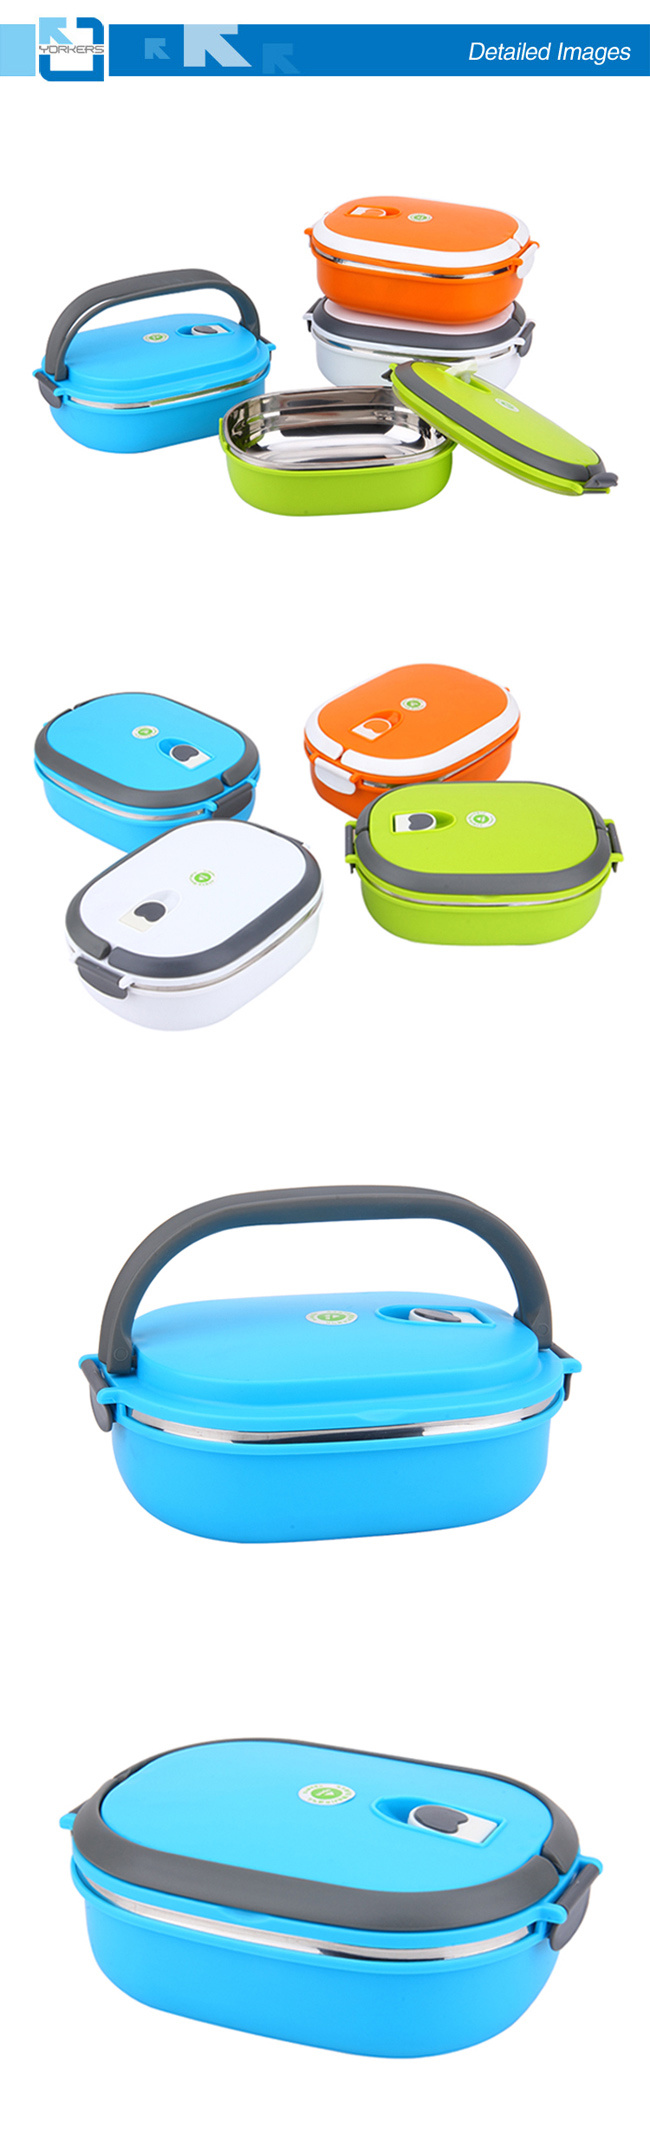 Stainless Steel Single Layer Tiffin Box Multicolor Modern Style Lunchbox